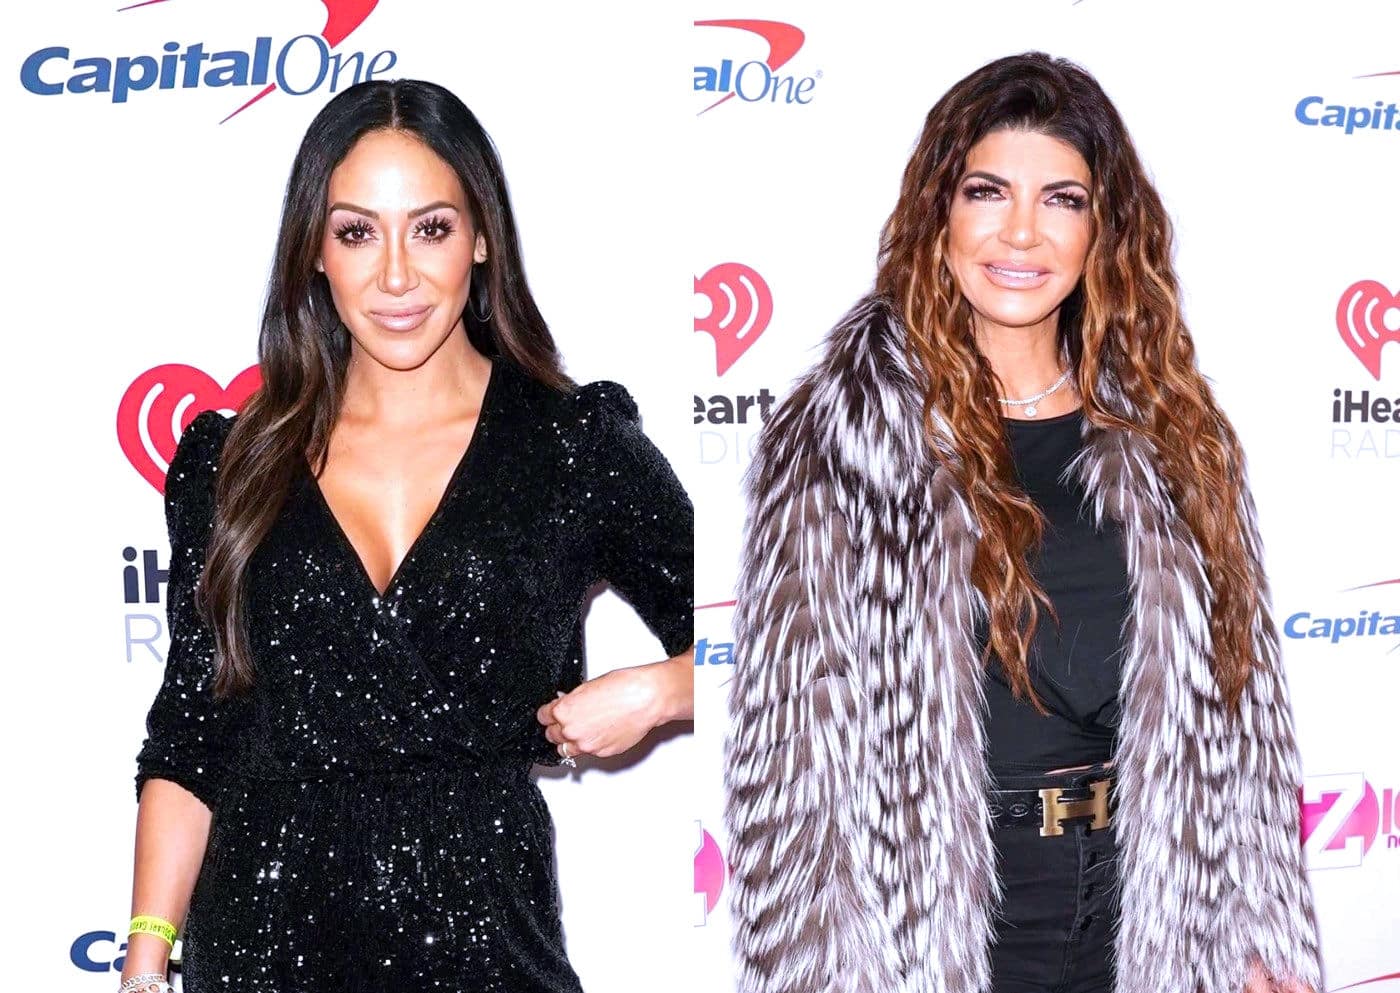 Melissa Gorga Denies Teresa Giudice Has Been 'Vindicated,' Claims Sister-in-Law Is “Finding New Reasons” to Get Mad, Hints at “Horrible Things” in Upcoming Season